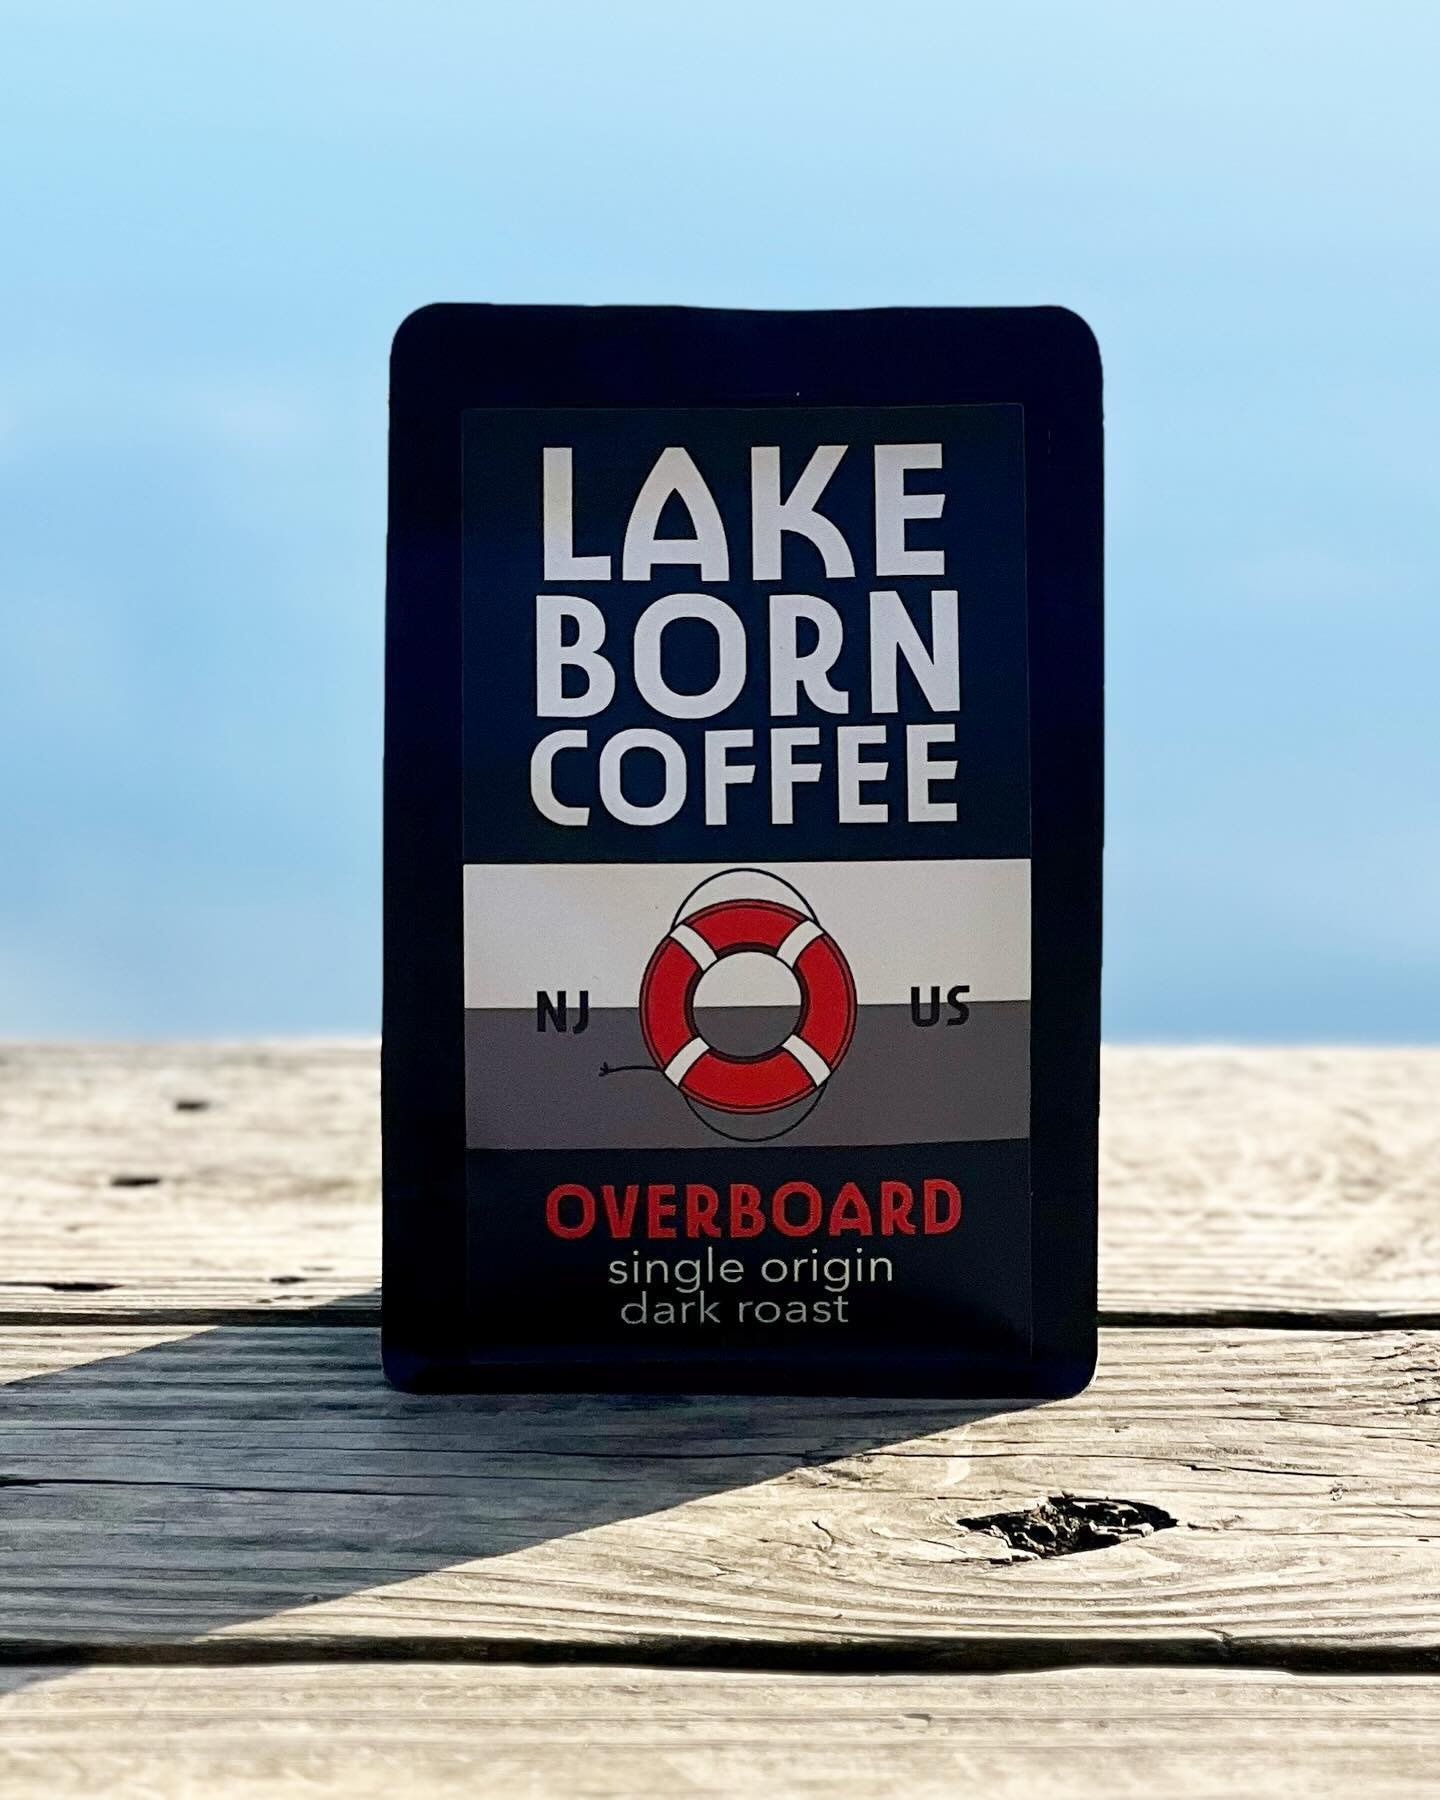 🛟OVERBOARD🛟  Now available in 12oz or 5 lb whole bean or ground bags! This single origin dark roast is 🤌🏻🤌🏻🤌🏻 

Let us know what you think!!

LBC⚓️